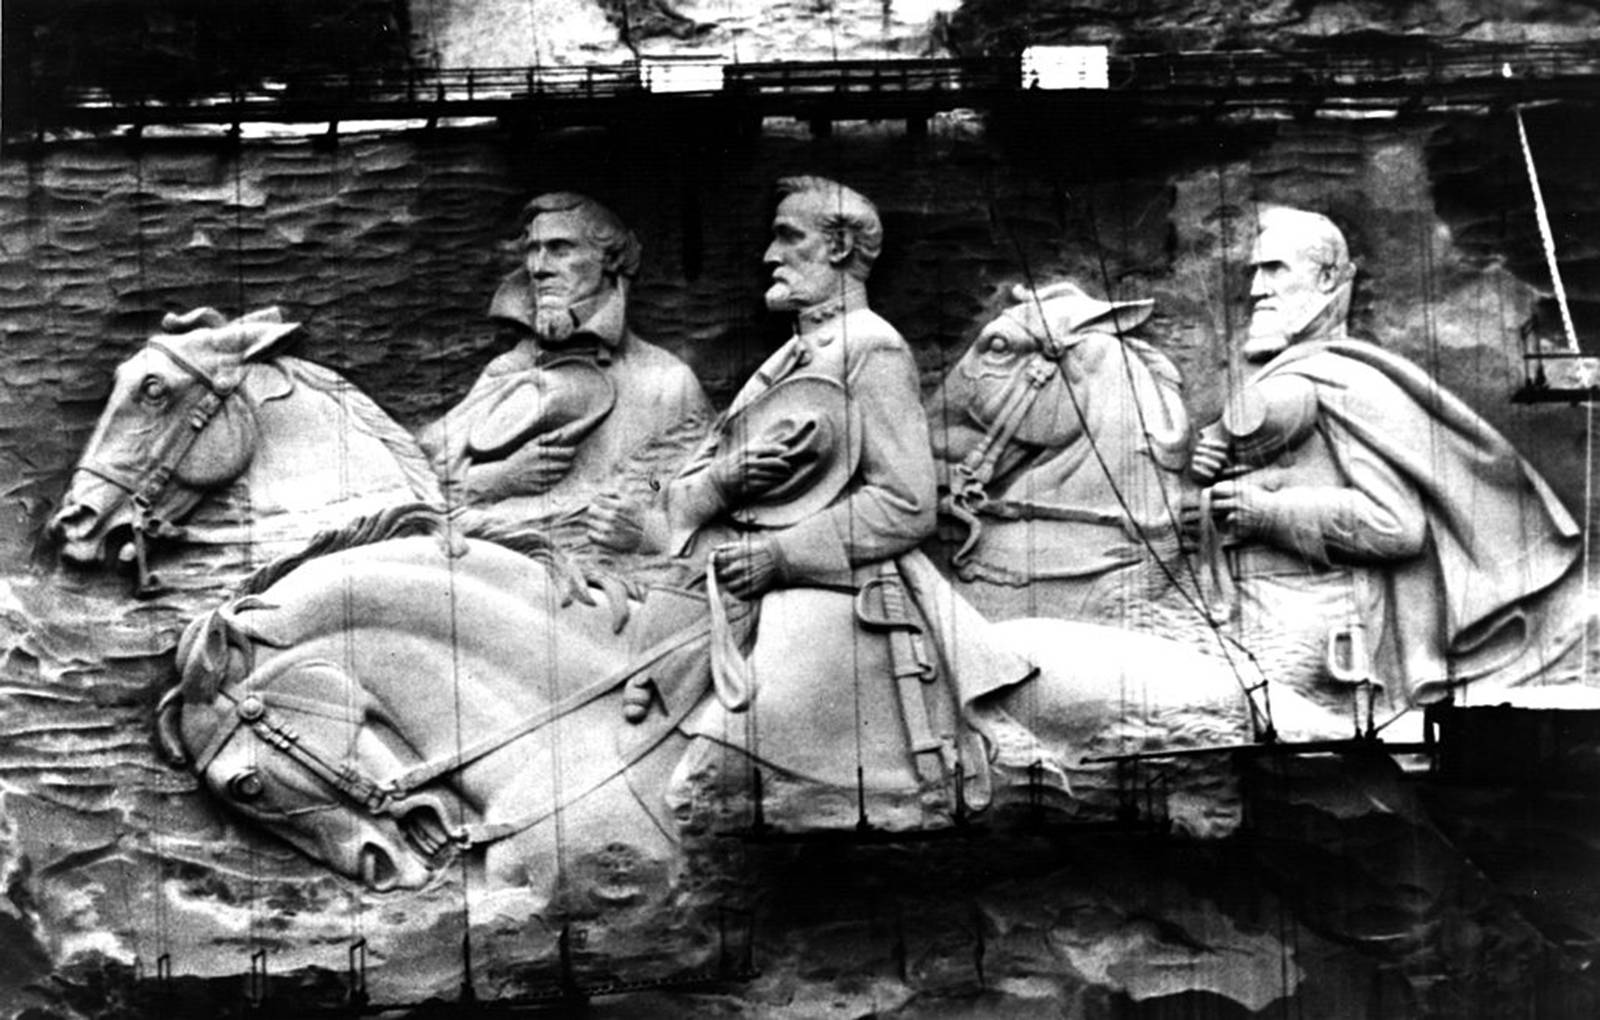 Photo by Fox Photos/Getty Images
Giant confederate figures sculptured in granite rock on Stone Mountain, Atlanta, pictured in 1969.